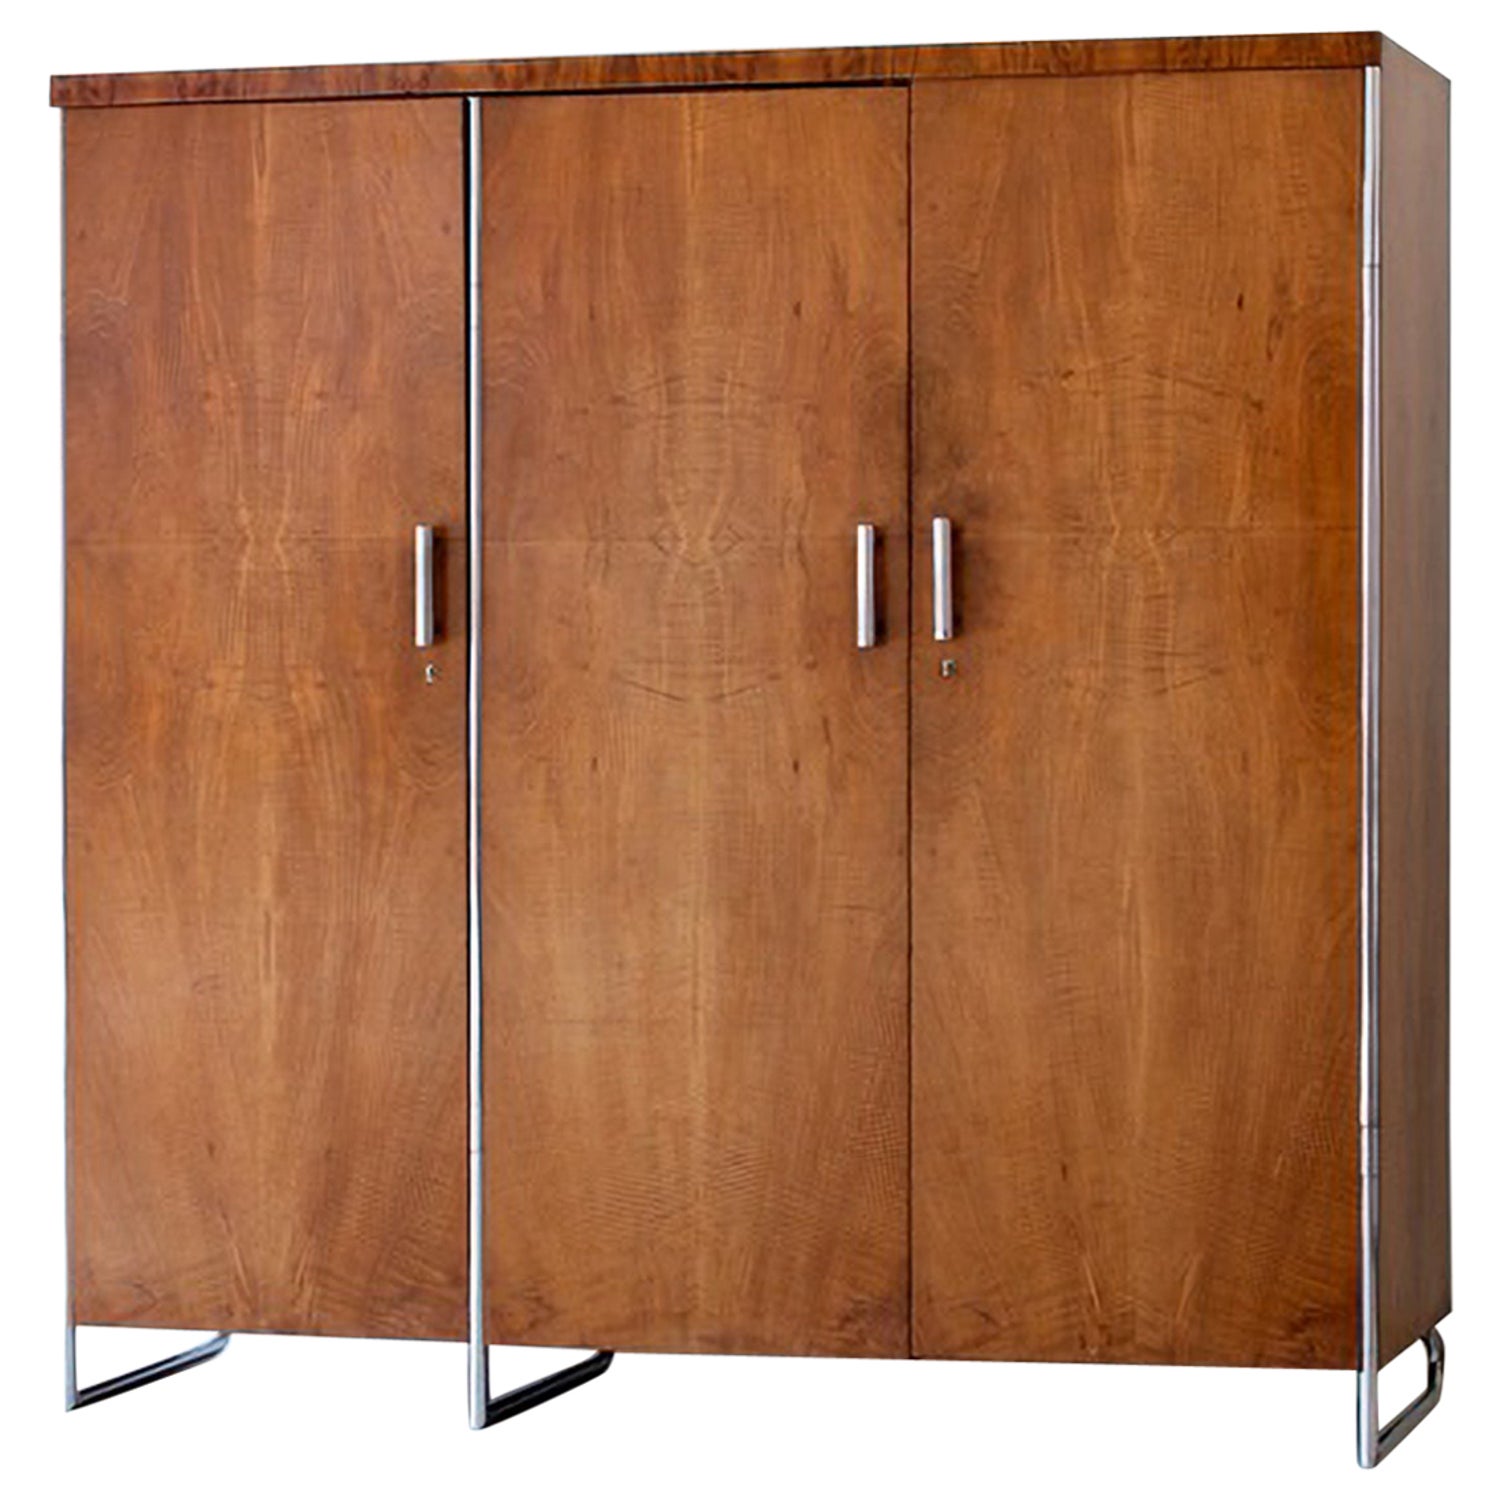 Bauhaus Wardrobes and Armoires - 9 For Sale at 1stDibs | bauhaus closet,  bauhaus cupboard, armoire bauhaus